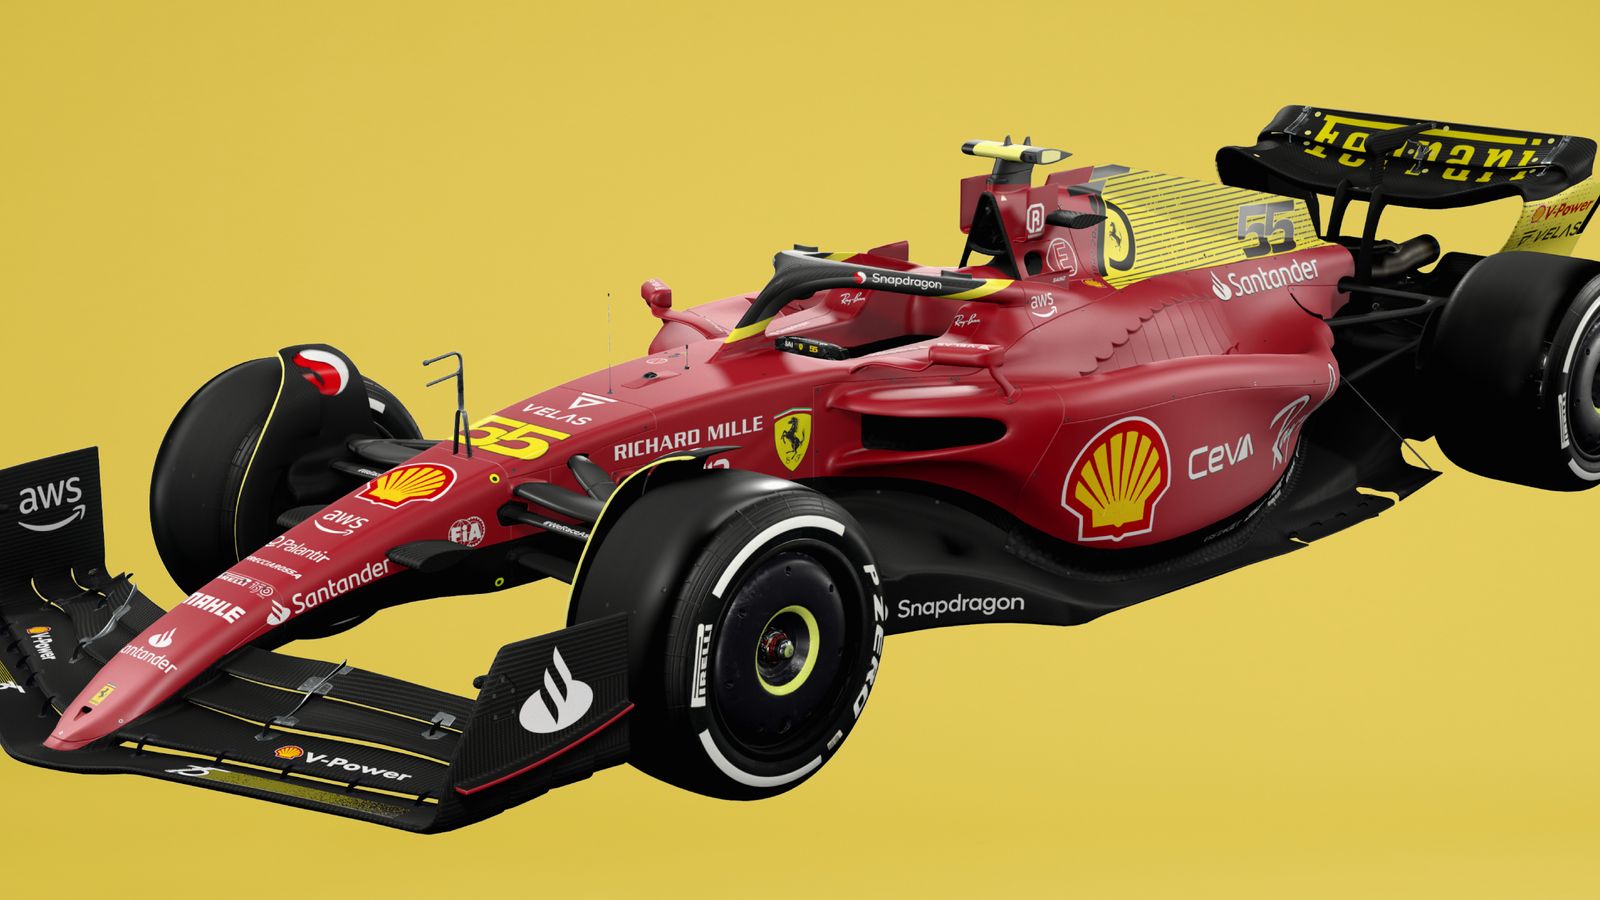 Italian GP Ferrari reveal special yellow look for home race as team